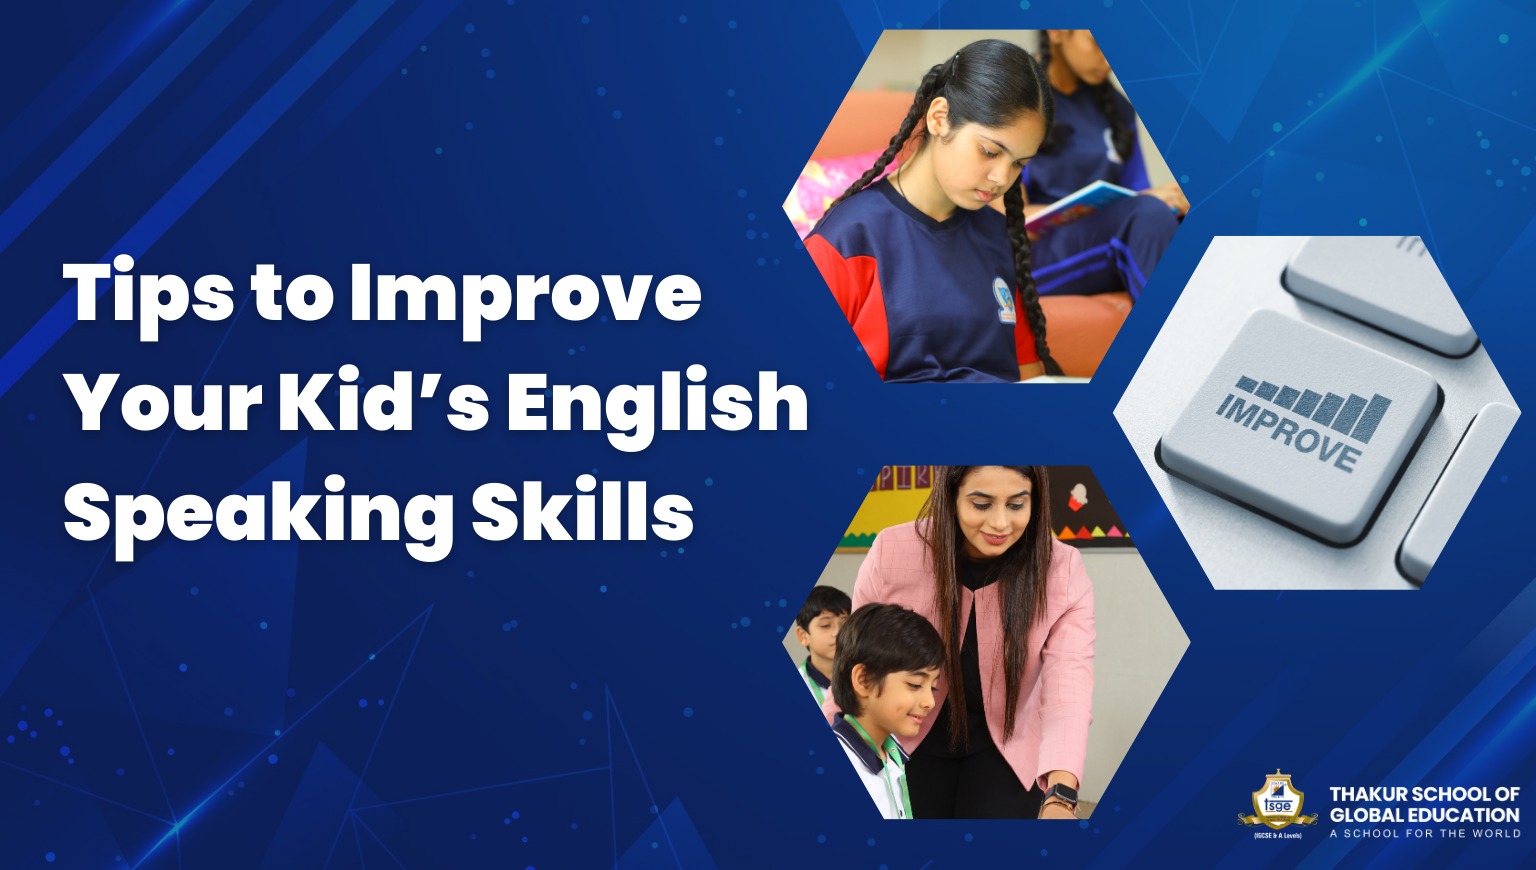 DISCOVER TIPS BY TSGE TO IMPROVE YOUR KID’S ENGLISH SPEAKING SKILLS